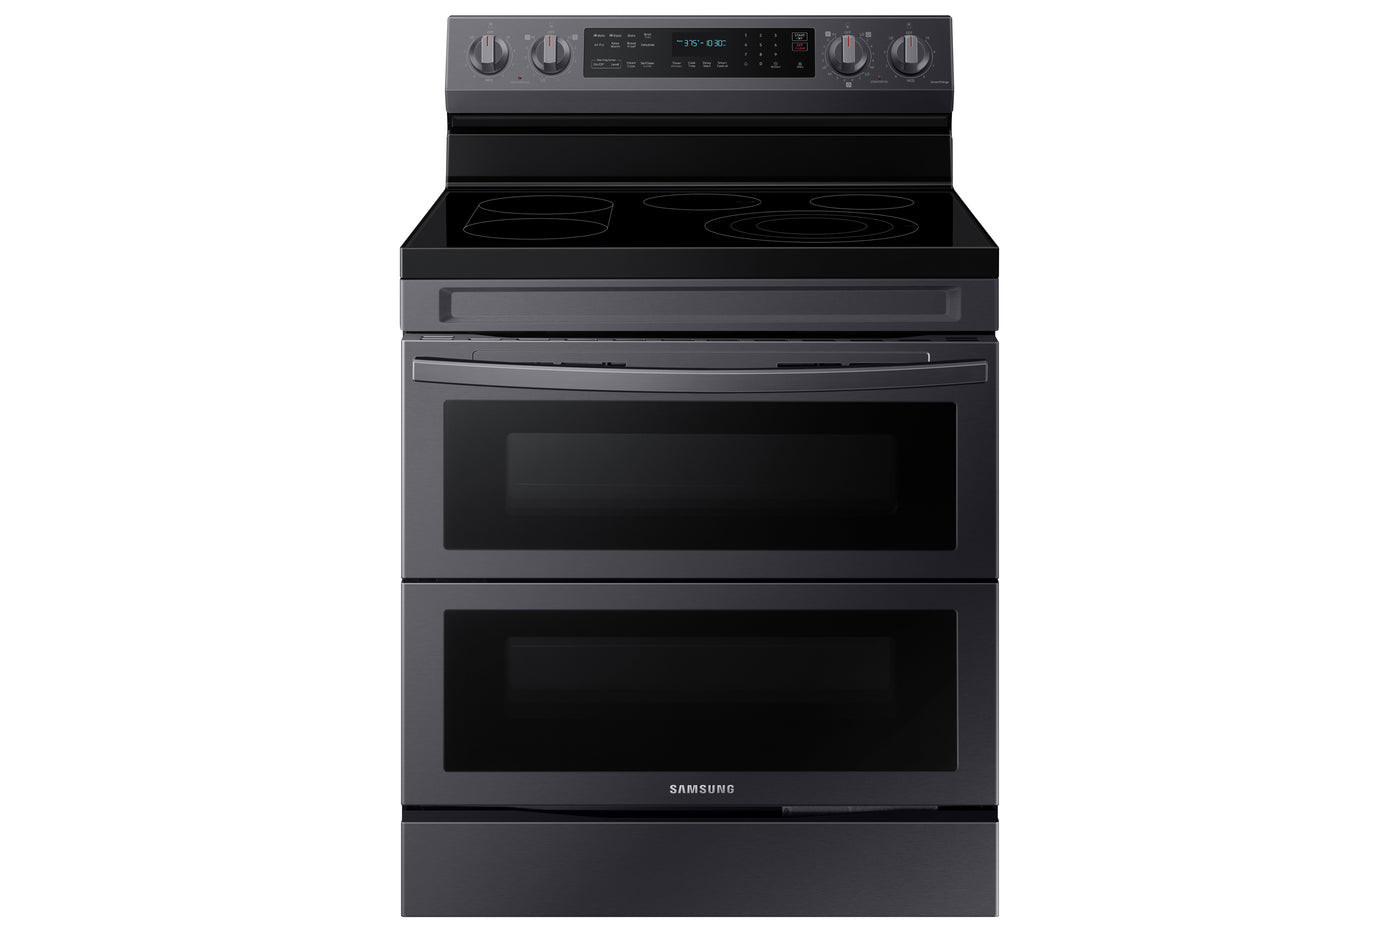 Samsung Black Stainless Steel 30" Dual Door Electric Freestanding Range with Air Fry (6.3 Cu. Ft.) - NE63A6751SG/AC